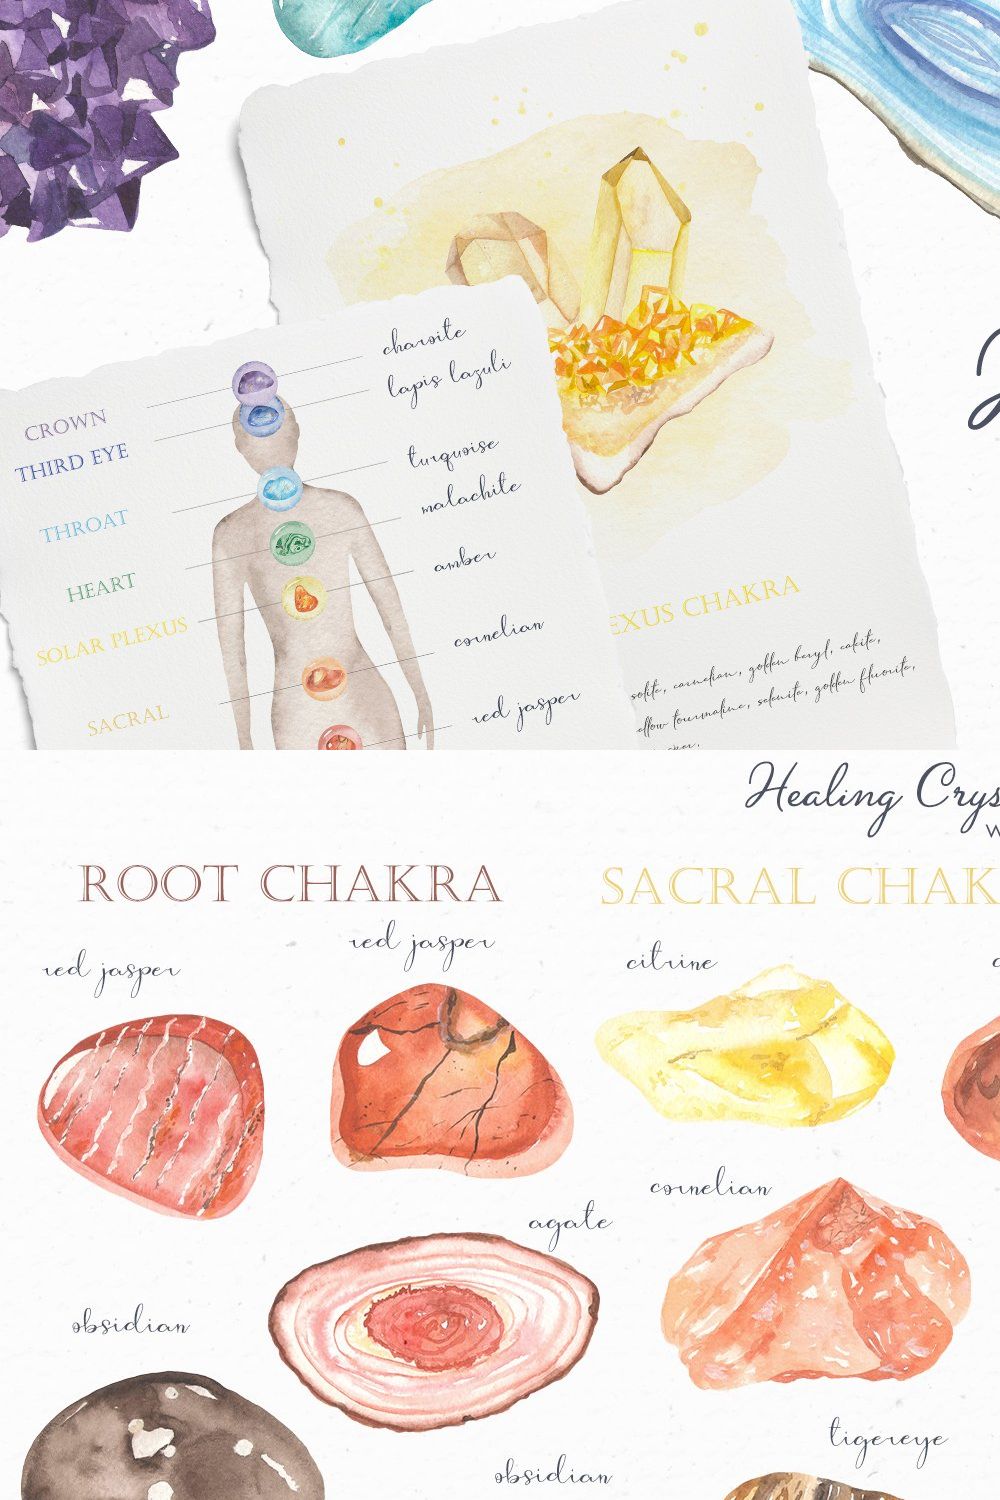 Healing crystals watercolor pinterest preview image.